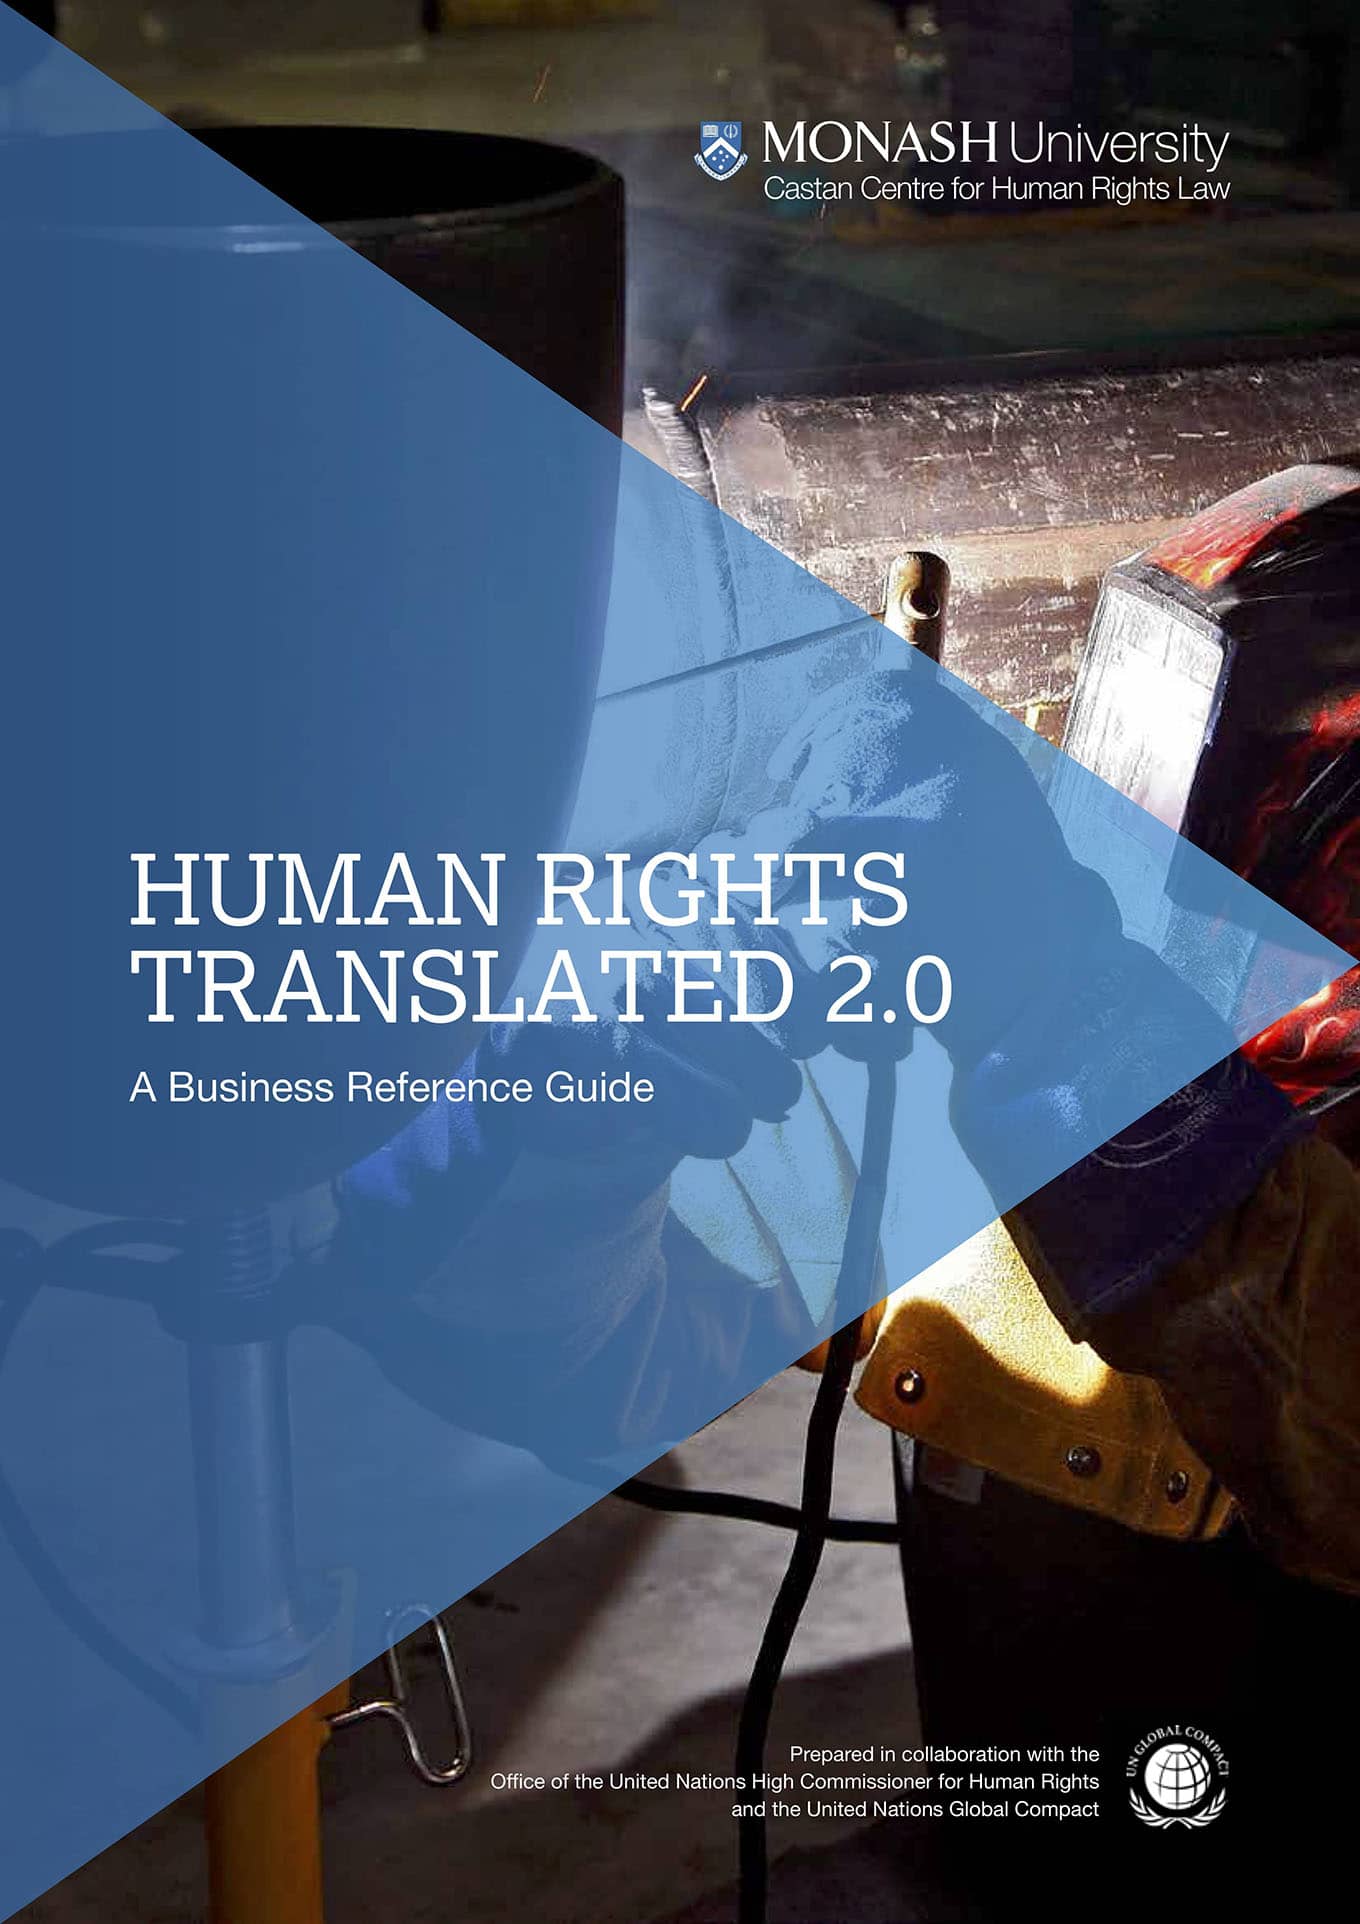 Human Rights Translated 2.0: A Business Reference Guide (Monash University, OHCHR, UNGC, 2017)